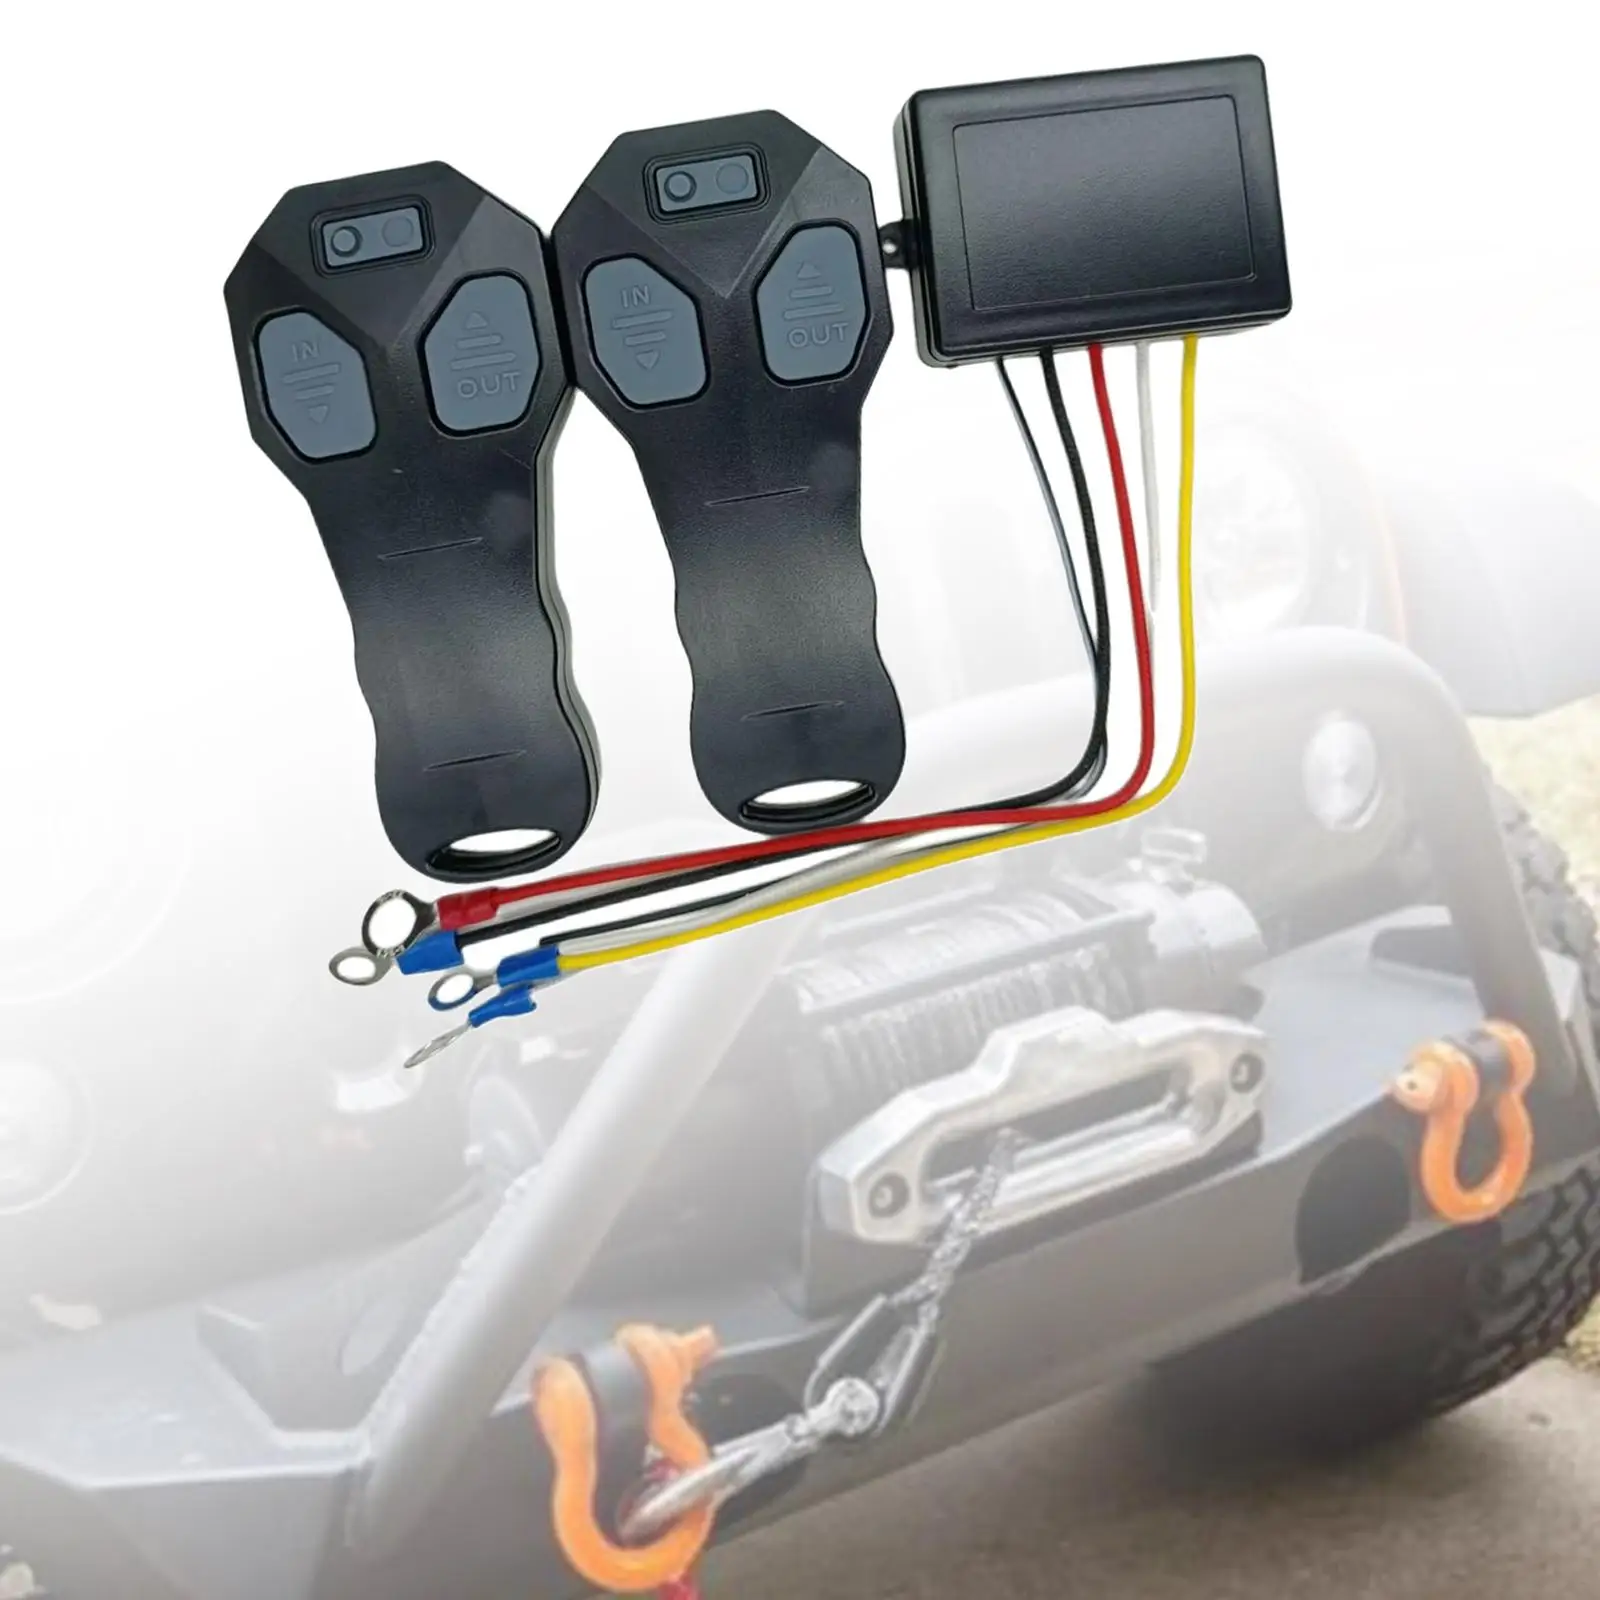 Wireless Winch Remote Control Kit Handset Switch for Car SUV Truck